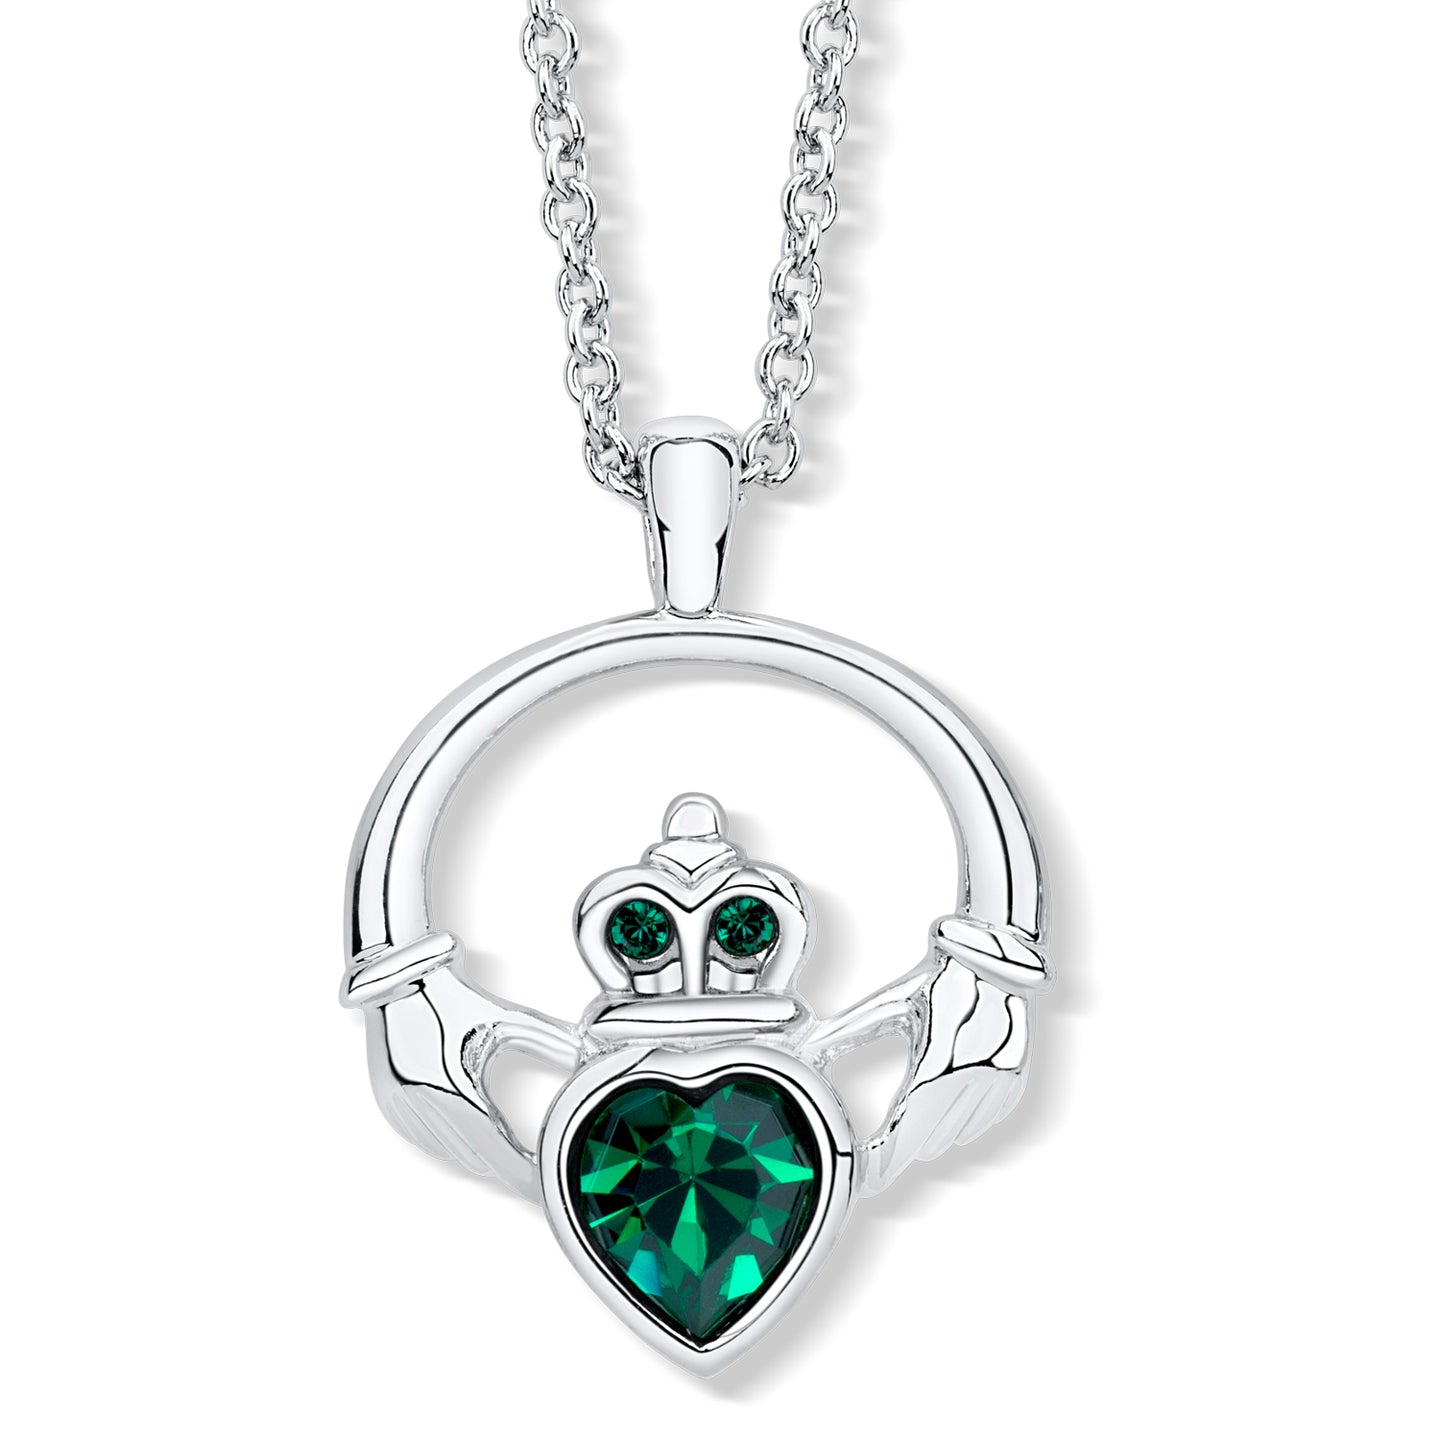 Claddagh Ring Pendant set with Emerald Crystal